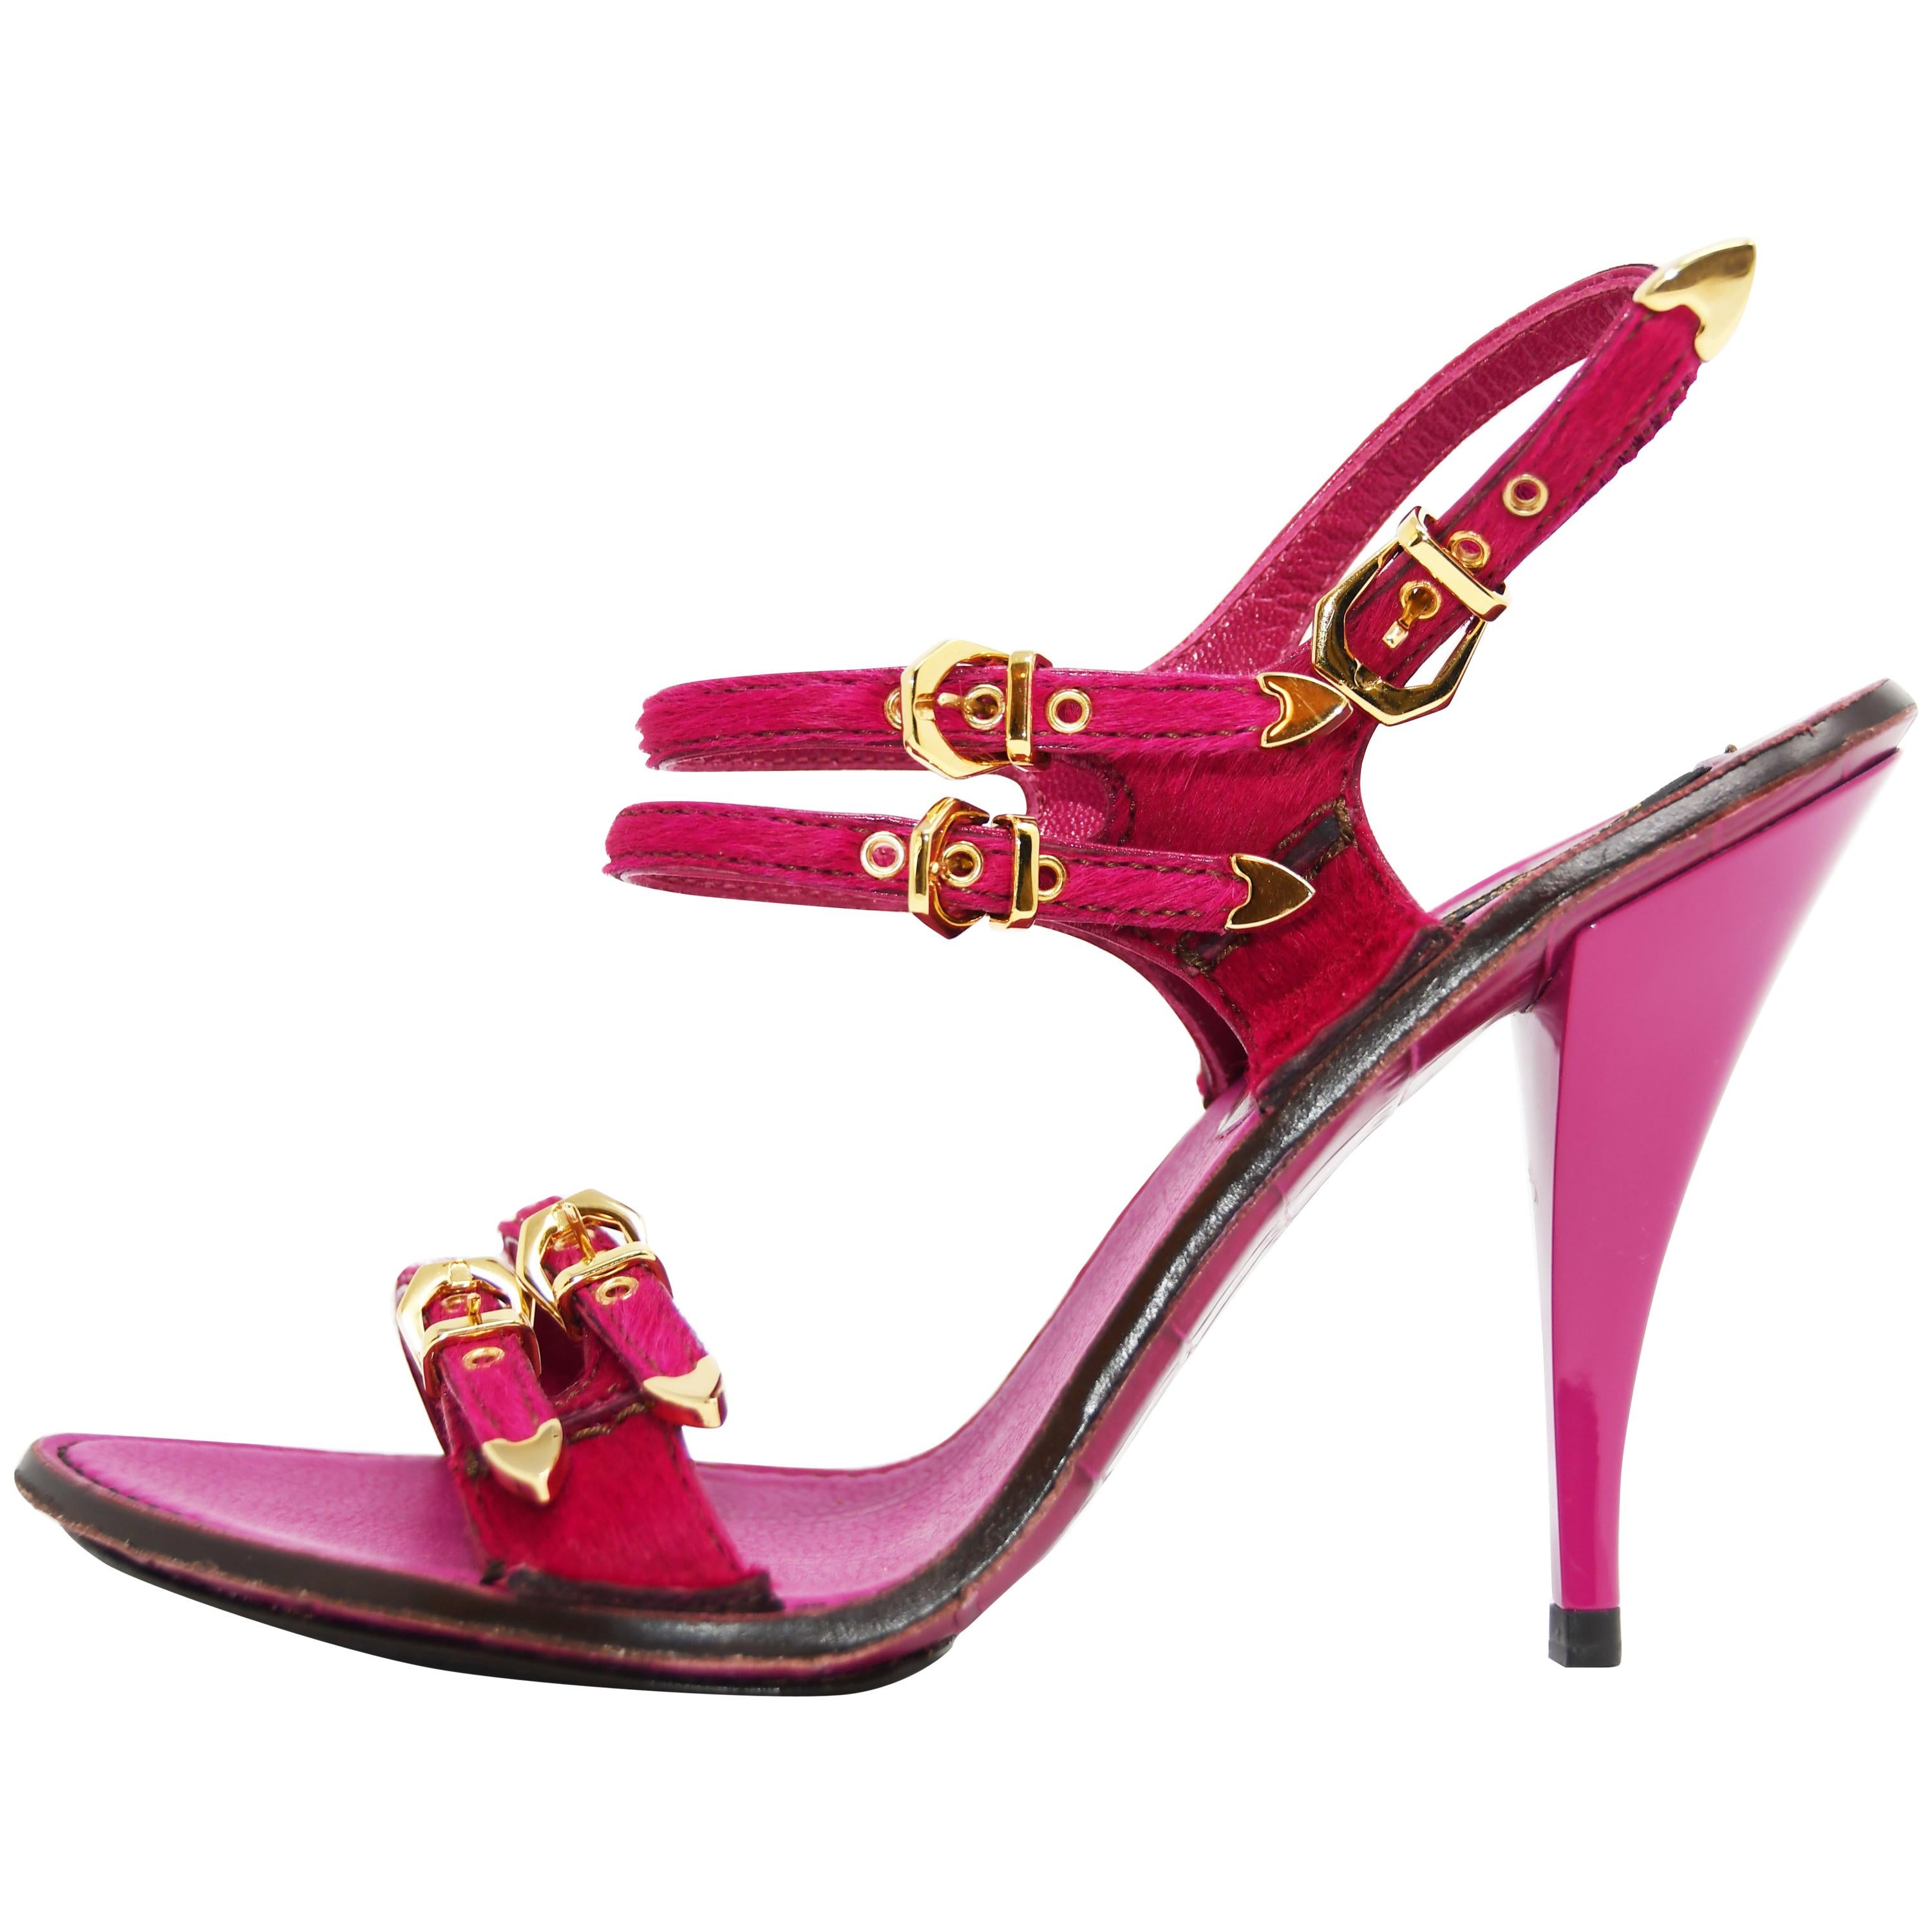 Louis Vuitton Fuchsia Sandal Heel with Alligator Embossed Sole, Size 38 ...